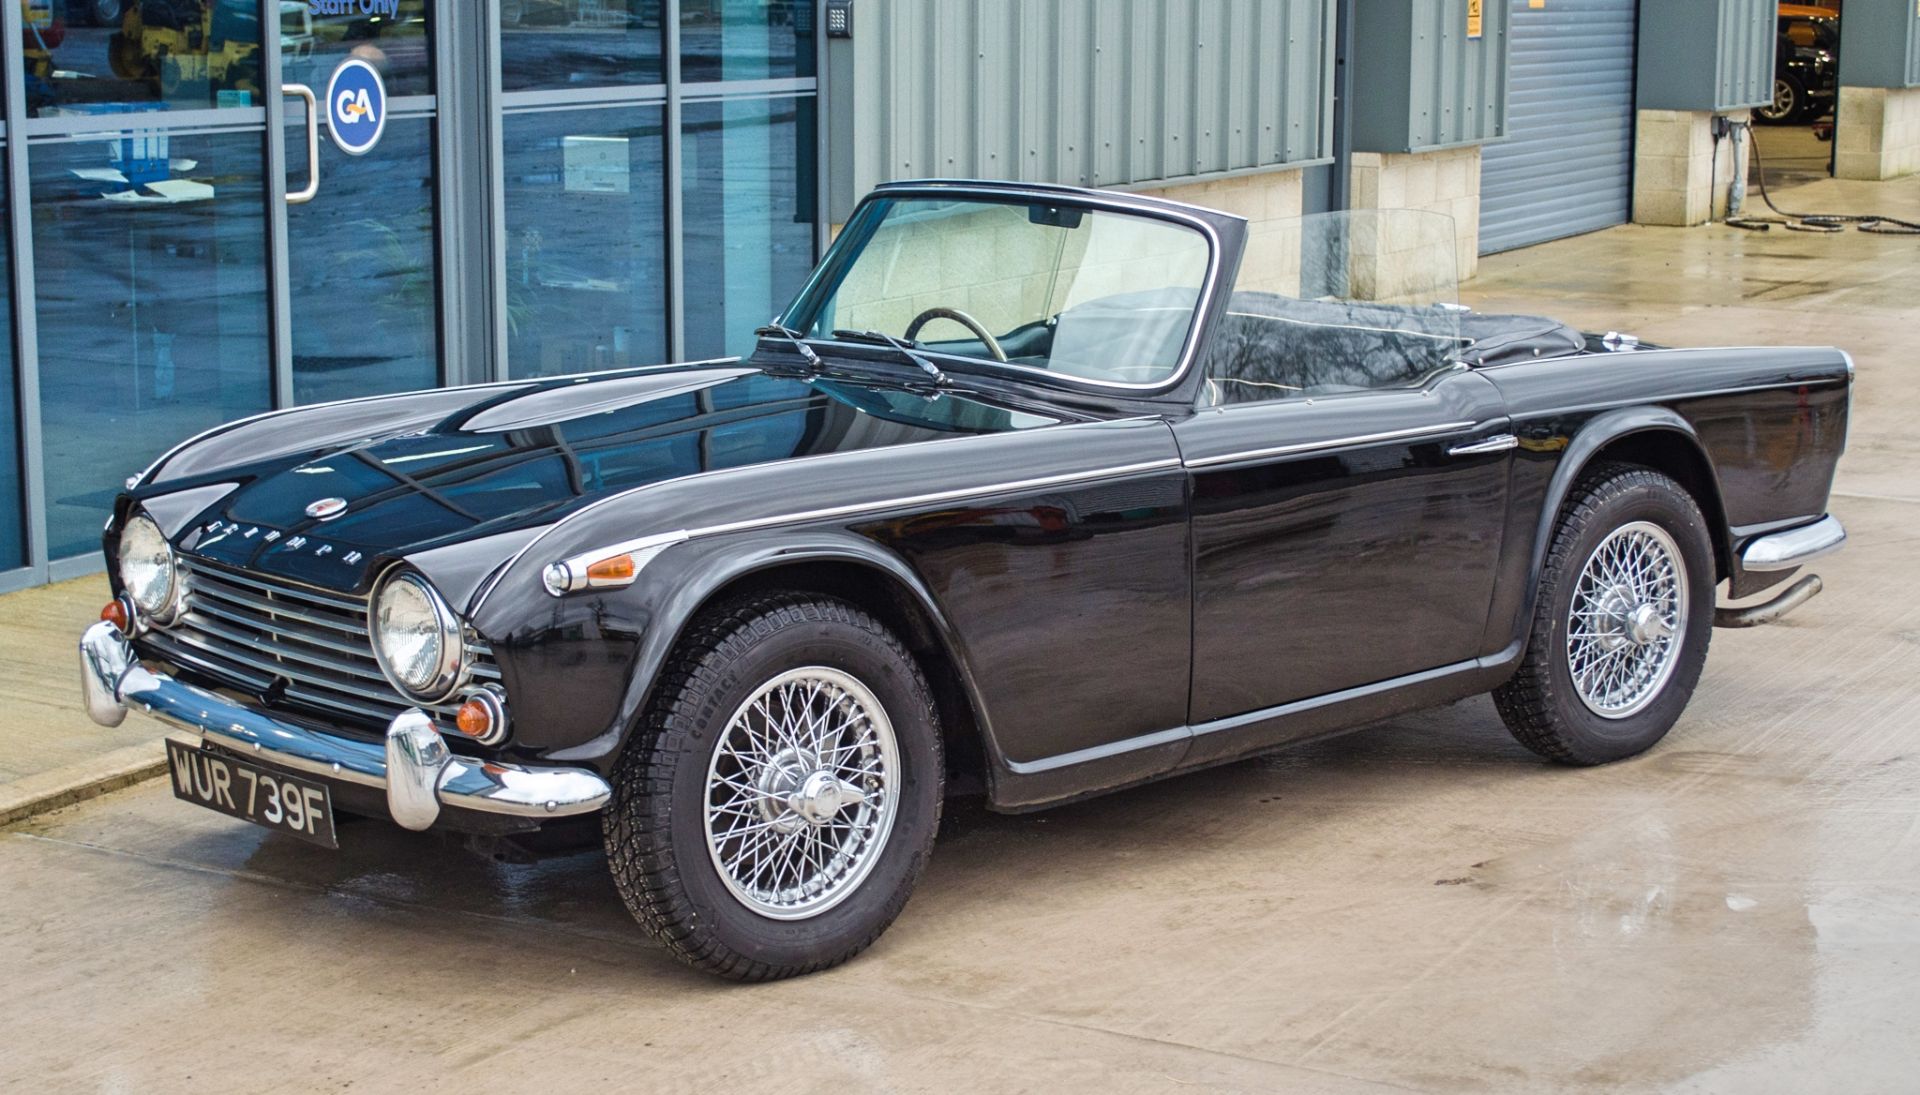 1967 Triumph TR4A IRS 2135cc convertible - Image 4 of 56